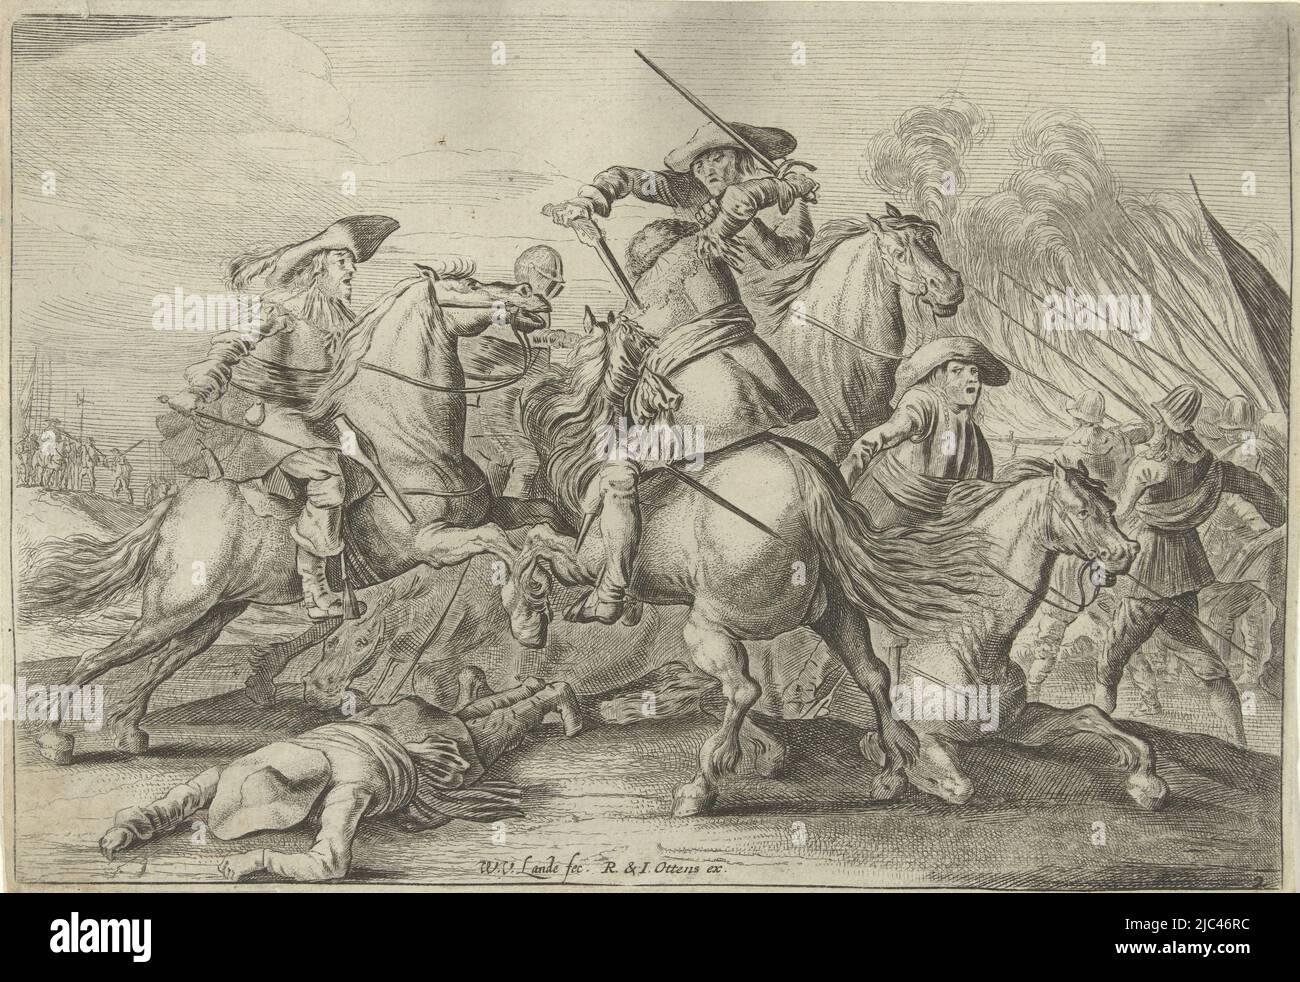 Five horsemen in combat with swords and pistols. In the center, a figure is shot in the back; on the left, a slain rider lies on the ground. The print is part of a six-part series of prints depicting equestrian combat. Print numbered right of center: 2., Five horsemen in battle Horsemen's fights (series title), print maker: Willem van de Lande, (mentioned on object), publisher: Reinier Ottens (I) & Josua, (mentioned on object), Amsterdam, 1635 - 1650 and/or 1725 - 1751, h 140 mm × w 204 mm Stock Photo